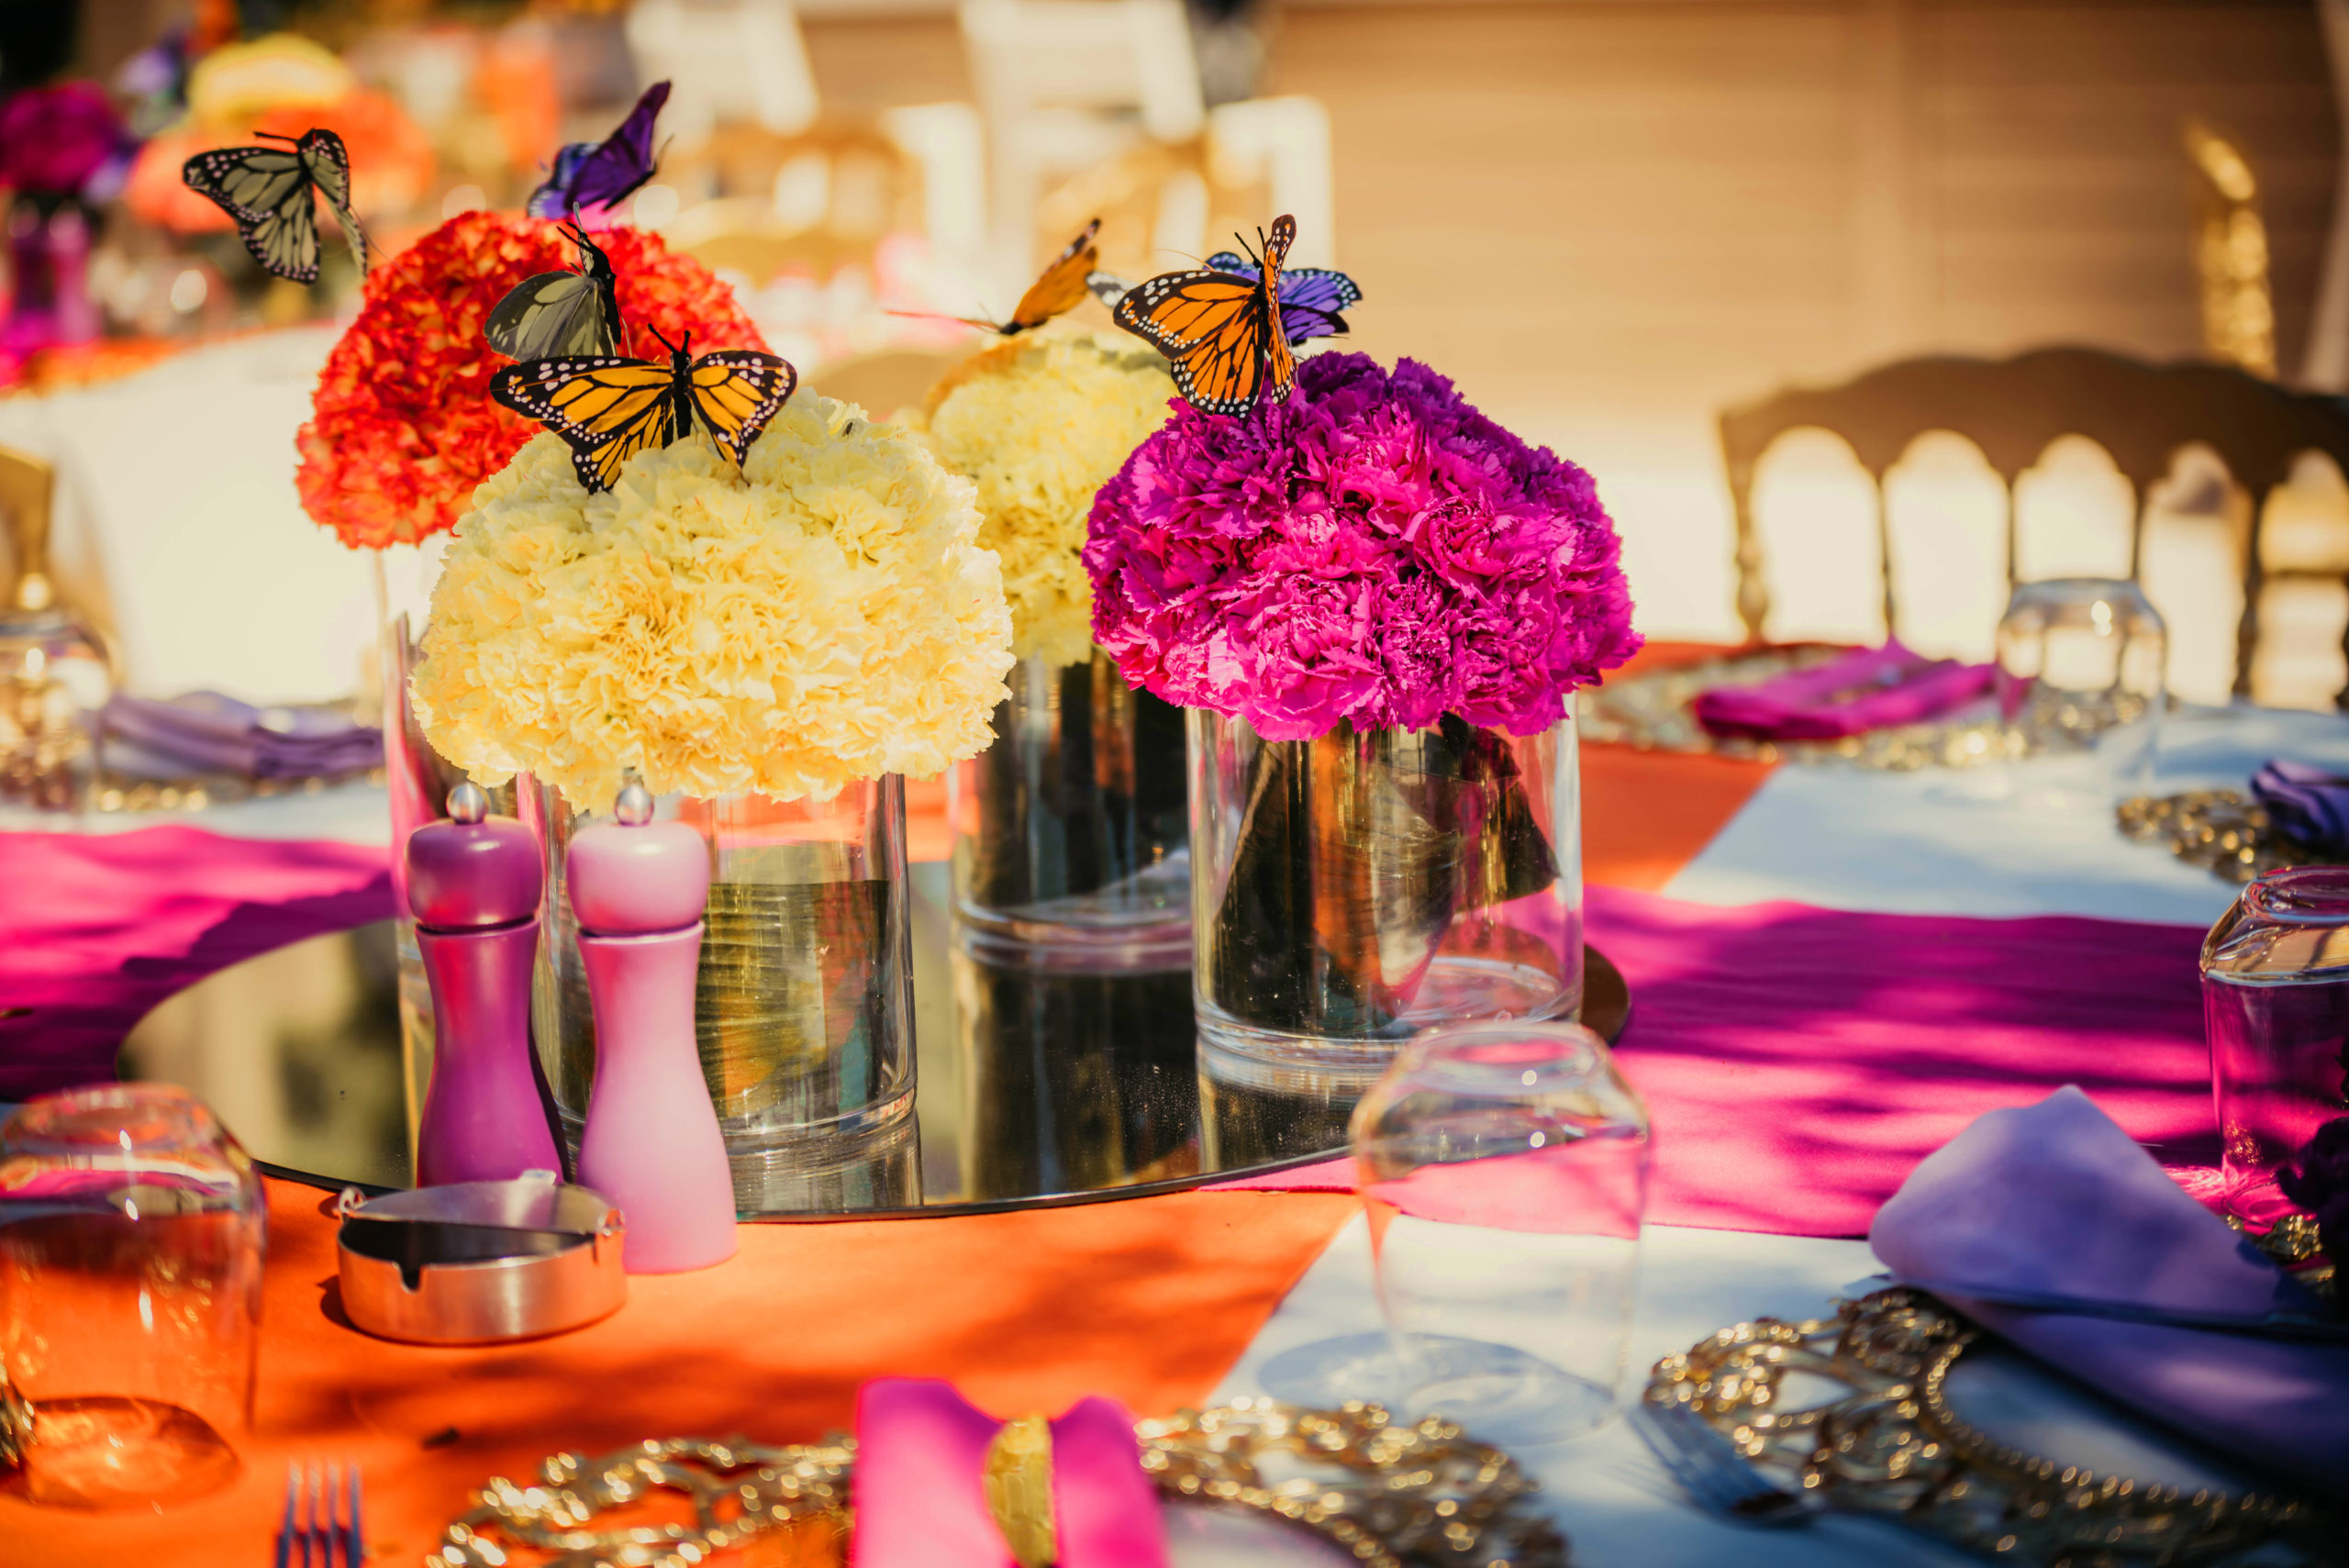 Colorful monochromatic floral arrangements with butterflies for special event